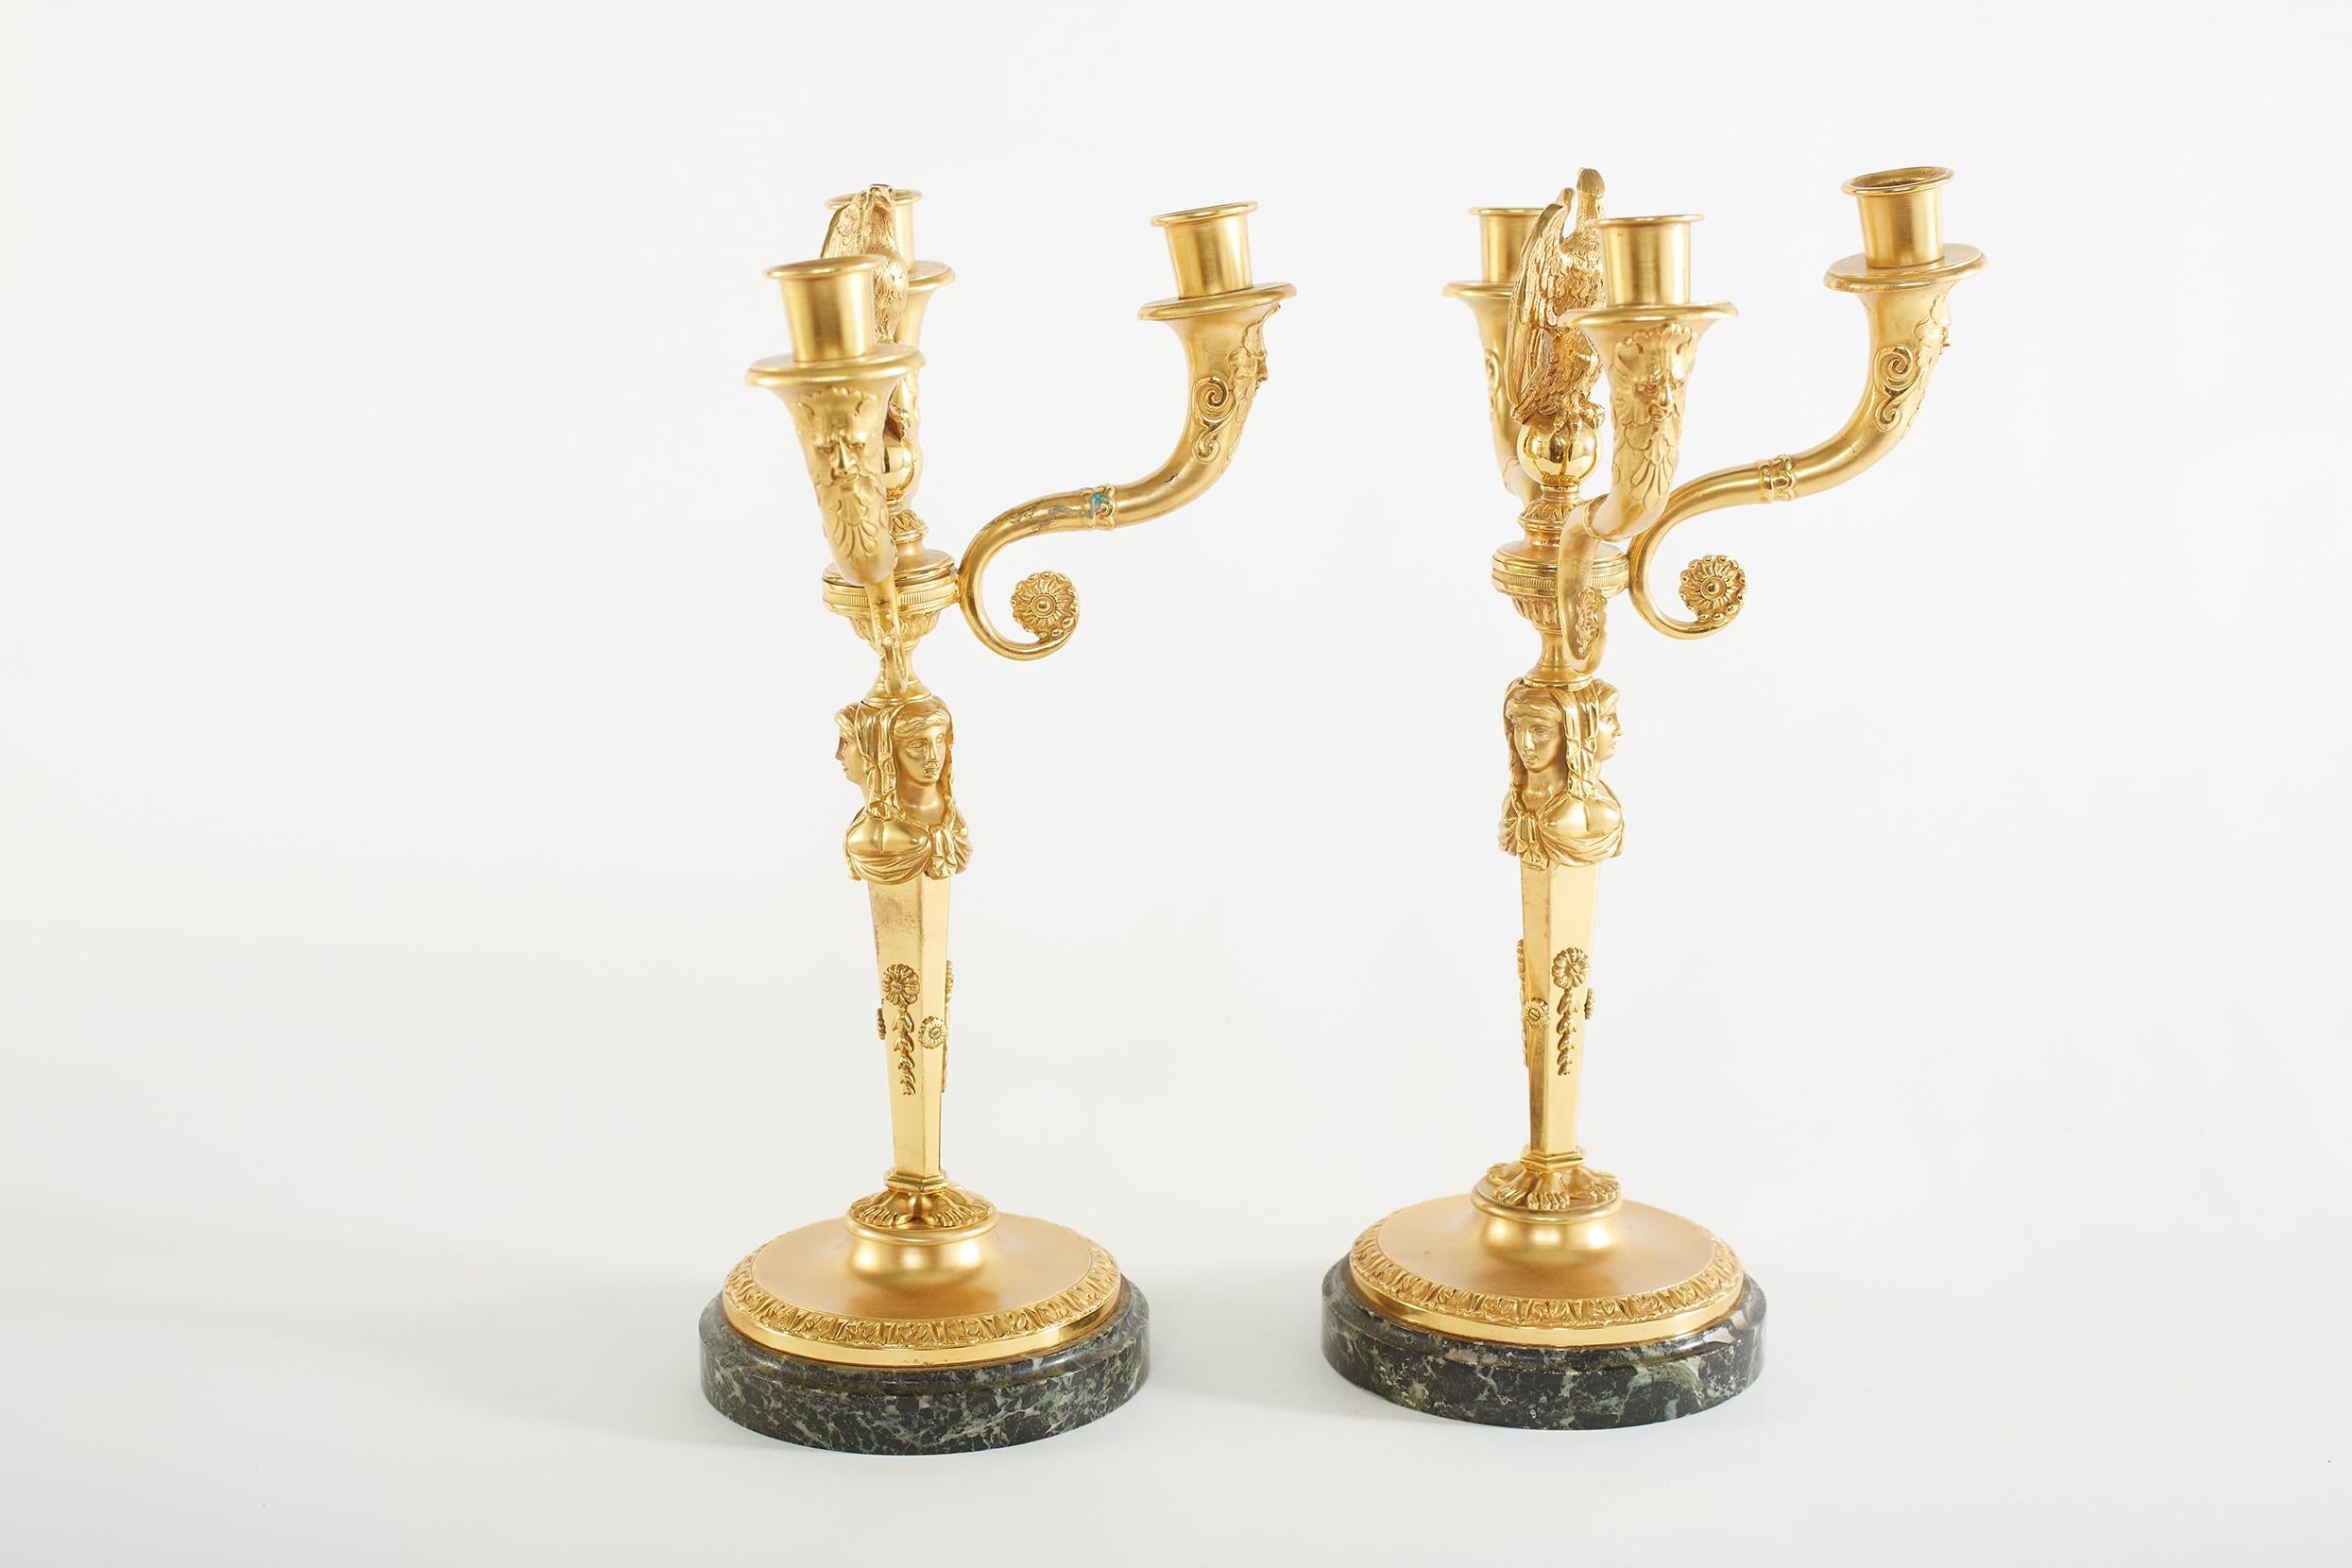 Pair gilt bronze figural three arm candelabra with round marble base and eagle finial top design details. Each candelabra is in great condition. Minor wear consistent with age / use. Each one measure 15 inches tall x 10 inches wide. The base is 6